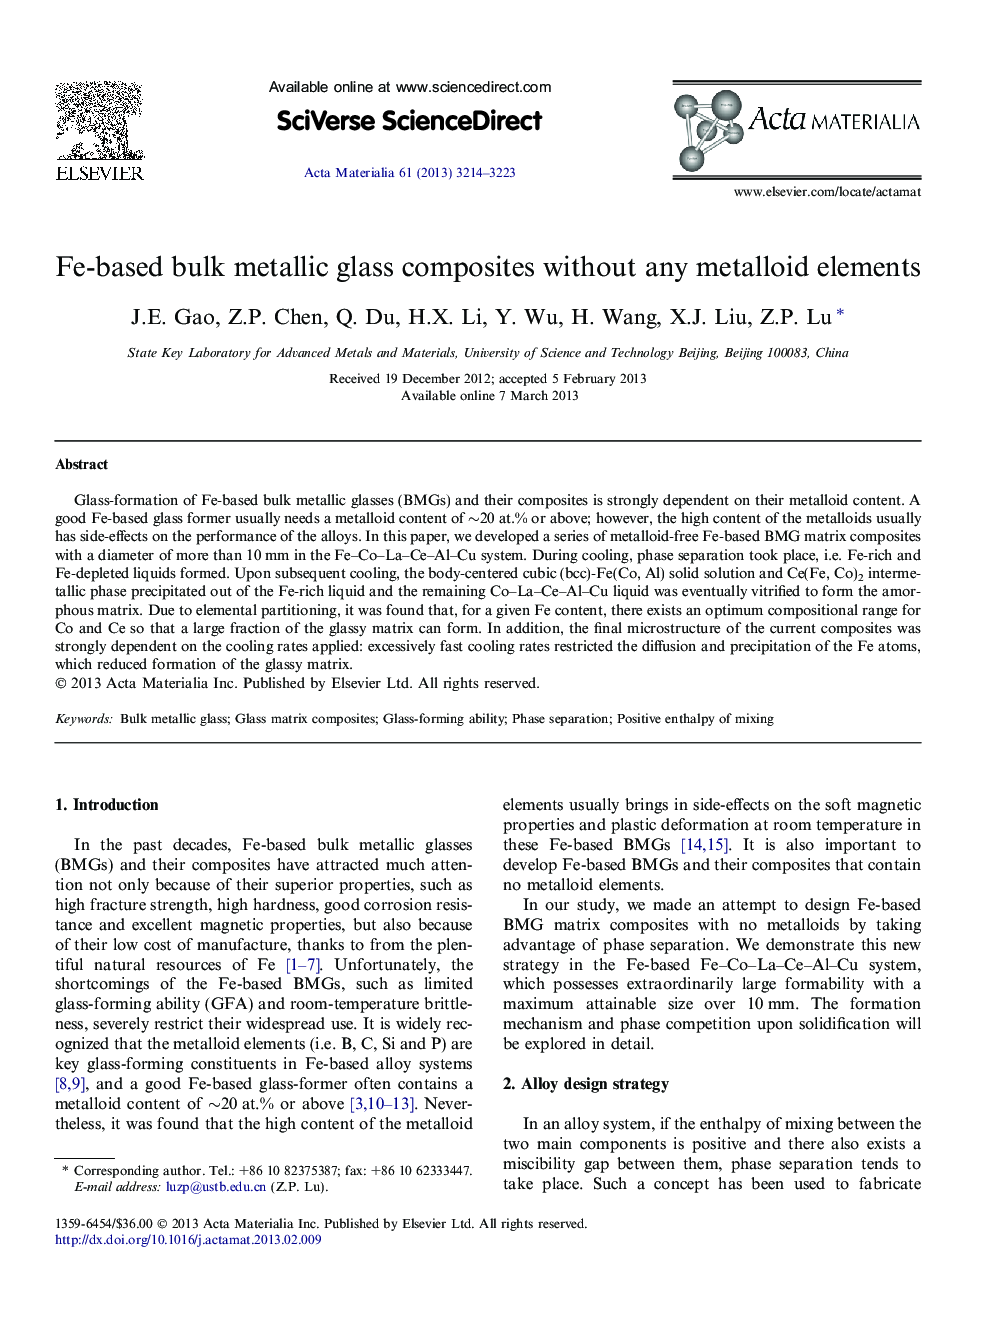 Fe-based bulk metallic glass composites without any metalloid elements